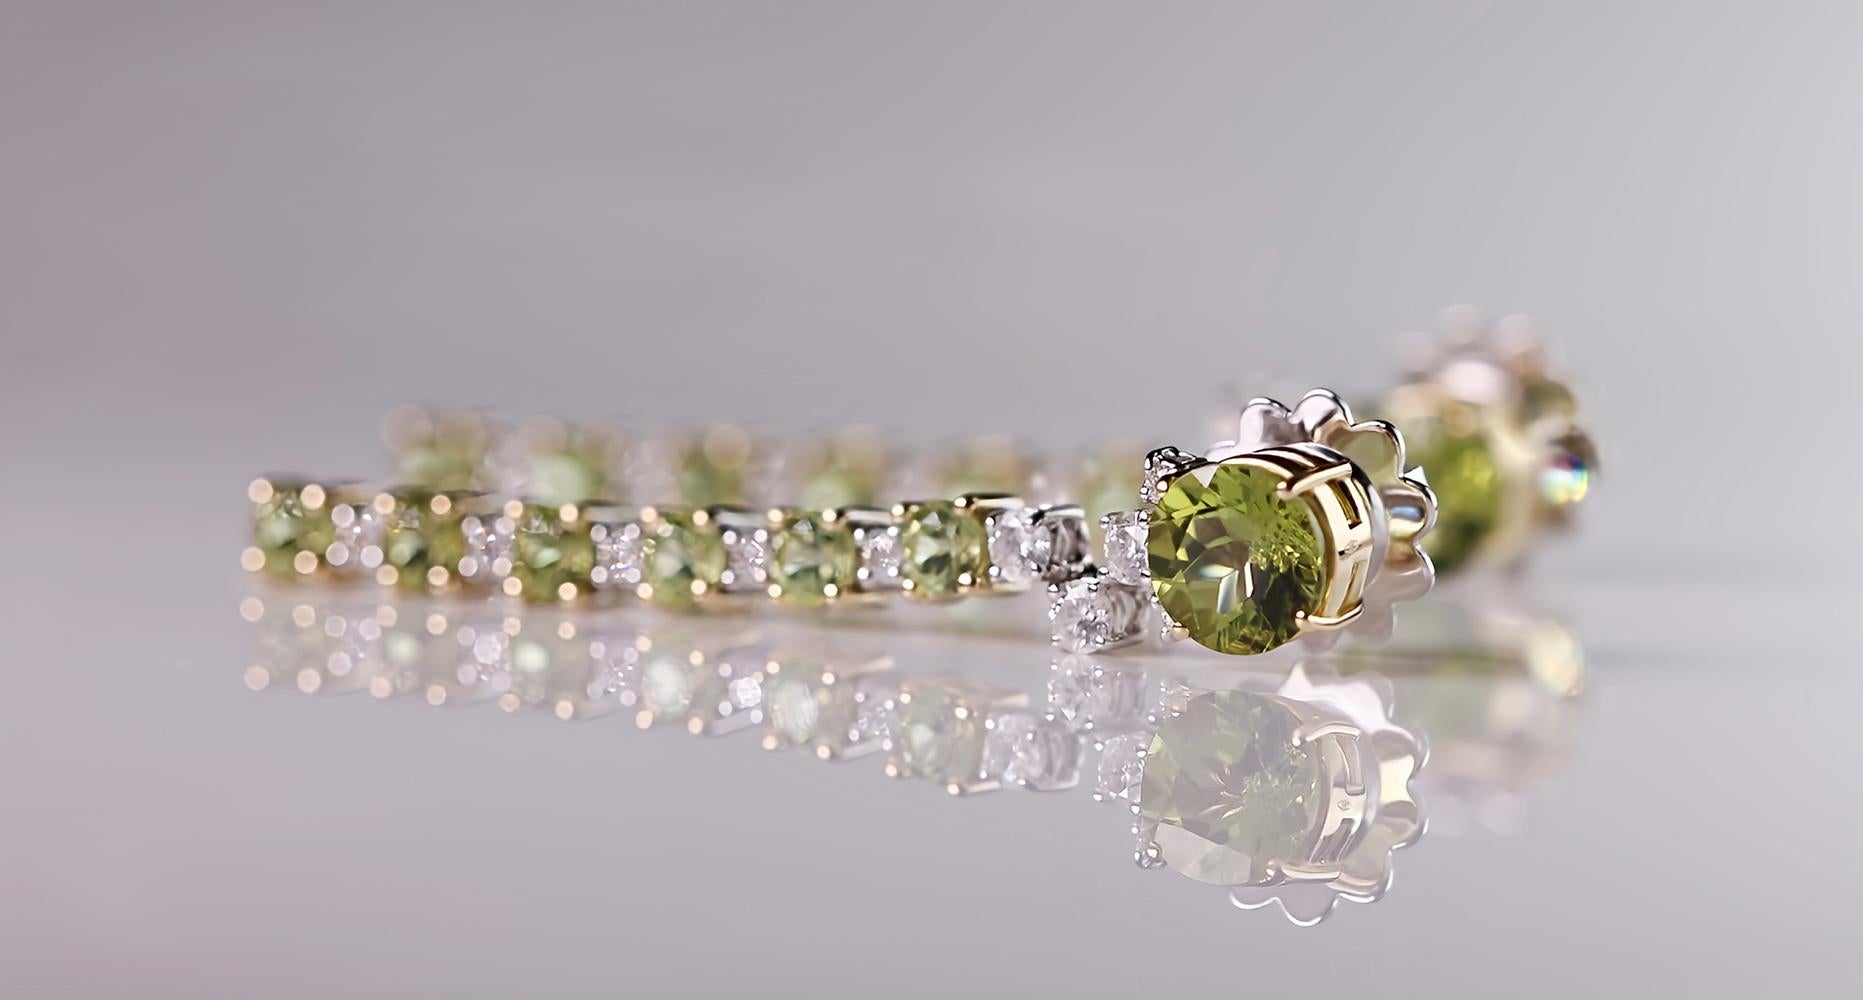 In Italian goldsmith tradition, each creation tells a story, every detail whispers a secret. And these earrings, in their minimalist essence, are a poignant testament to such narrative.

A peridot, gracefully placed at the lobe, serves as the